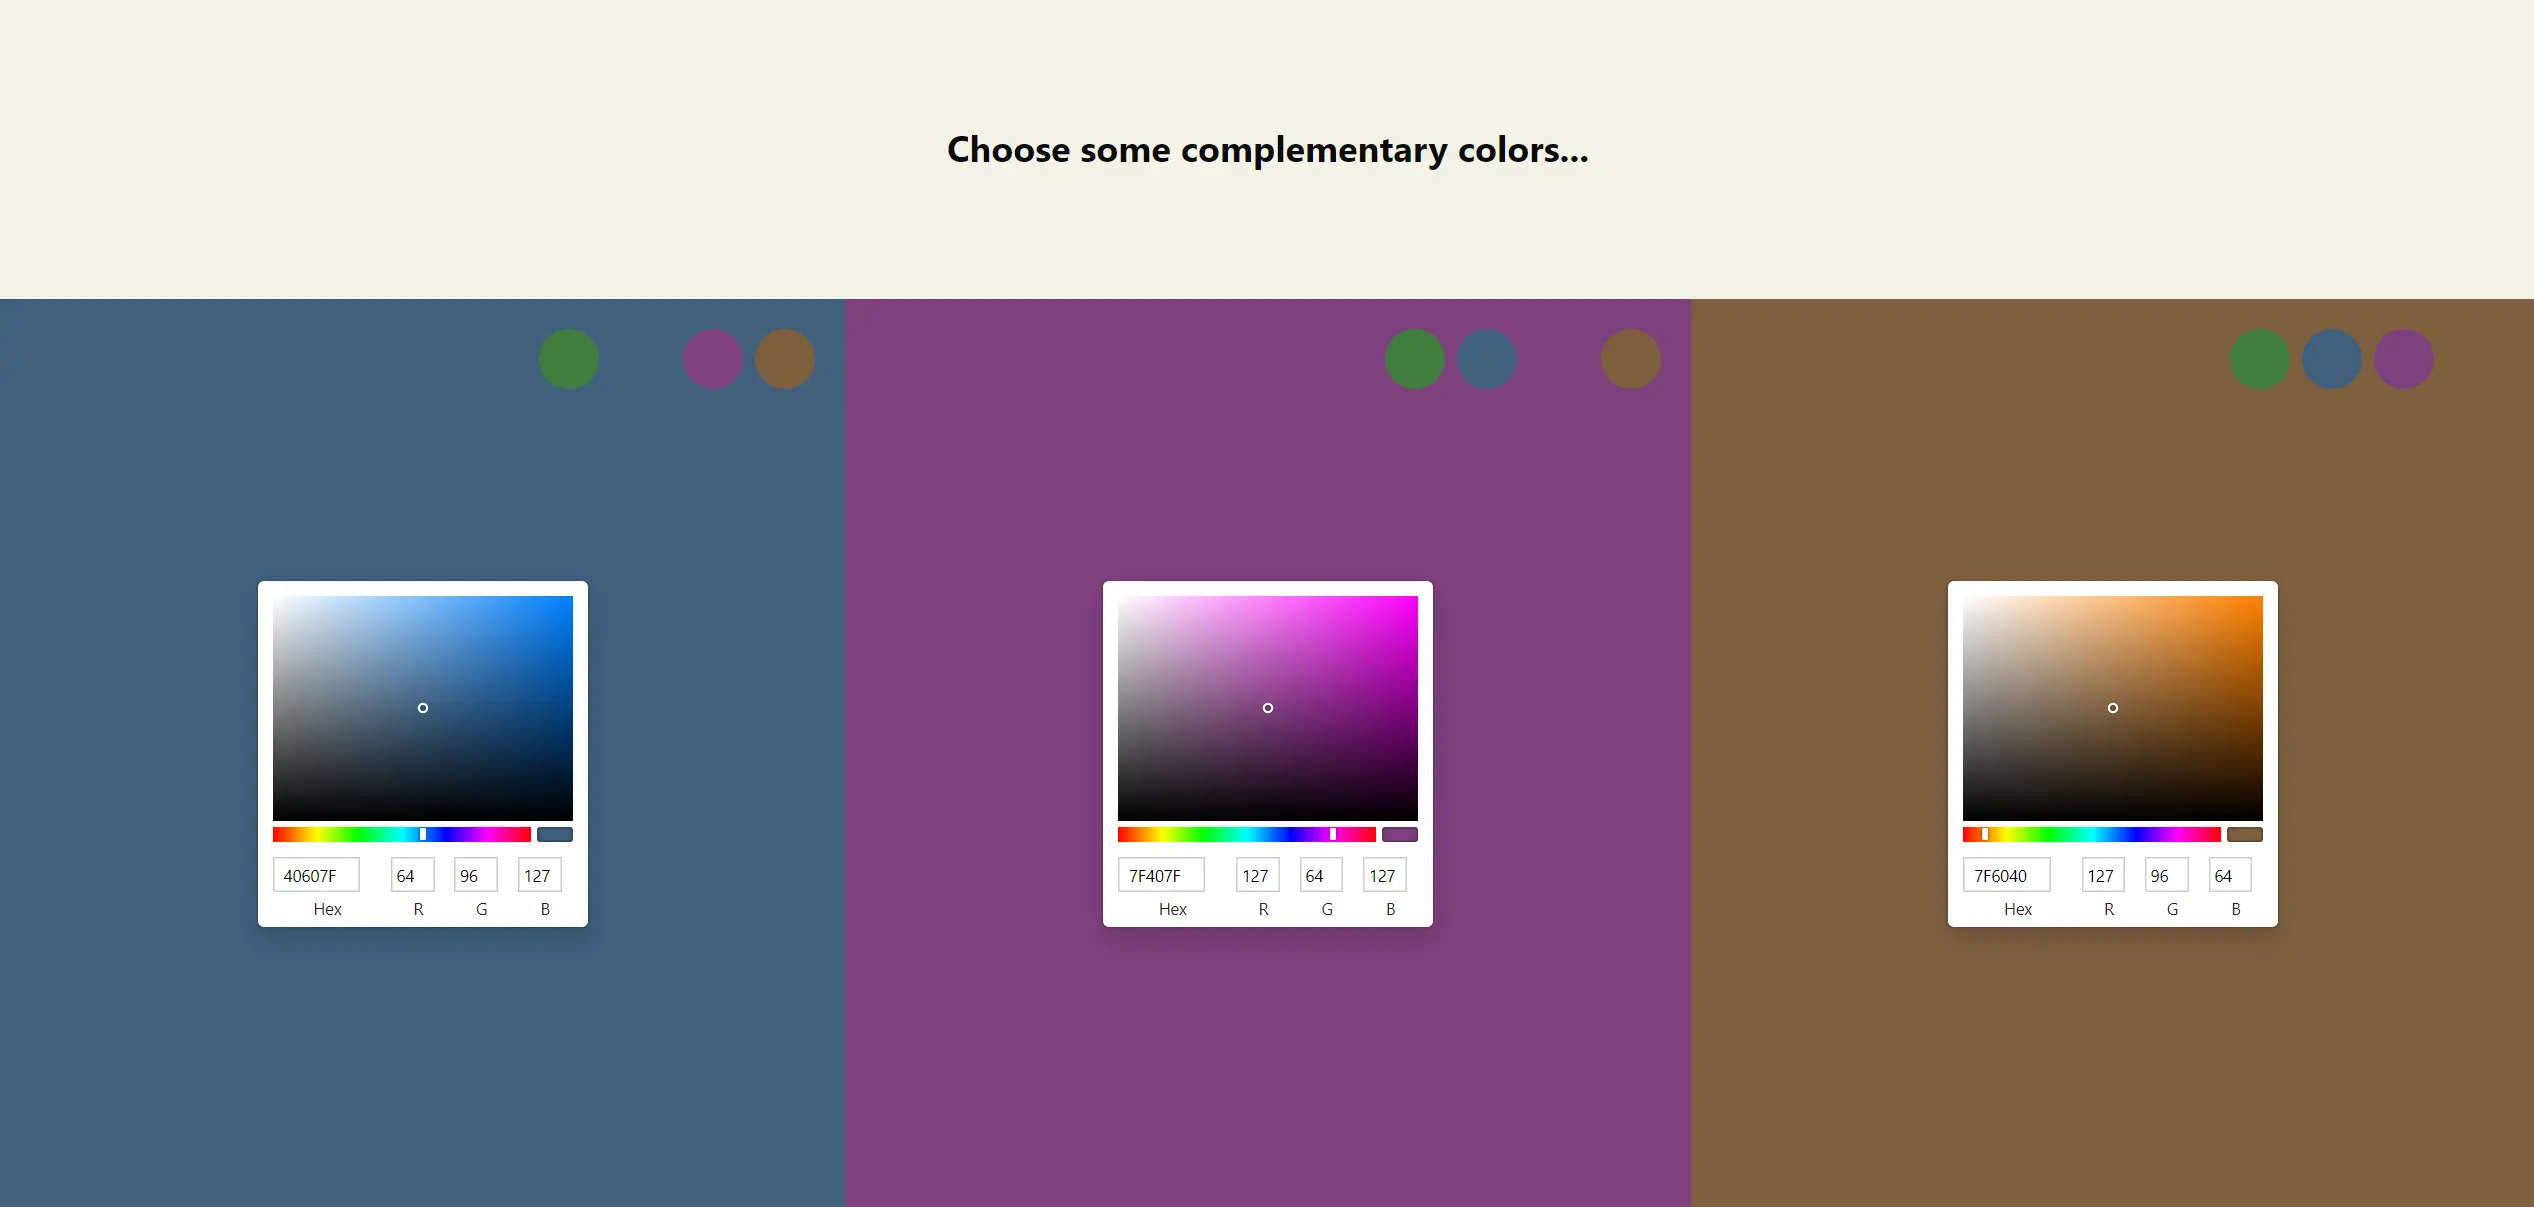 Complementary color selection